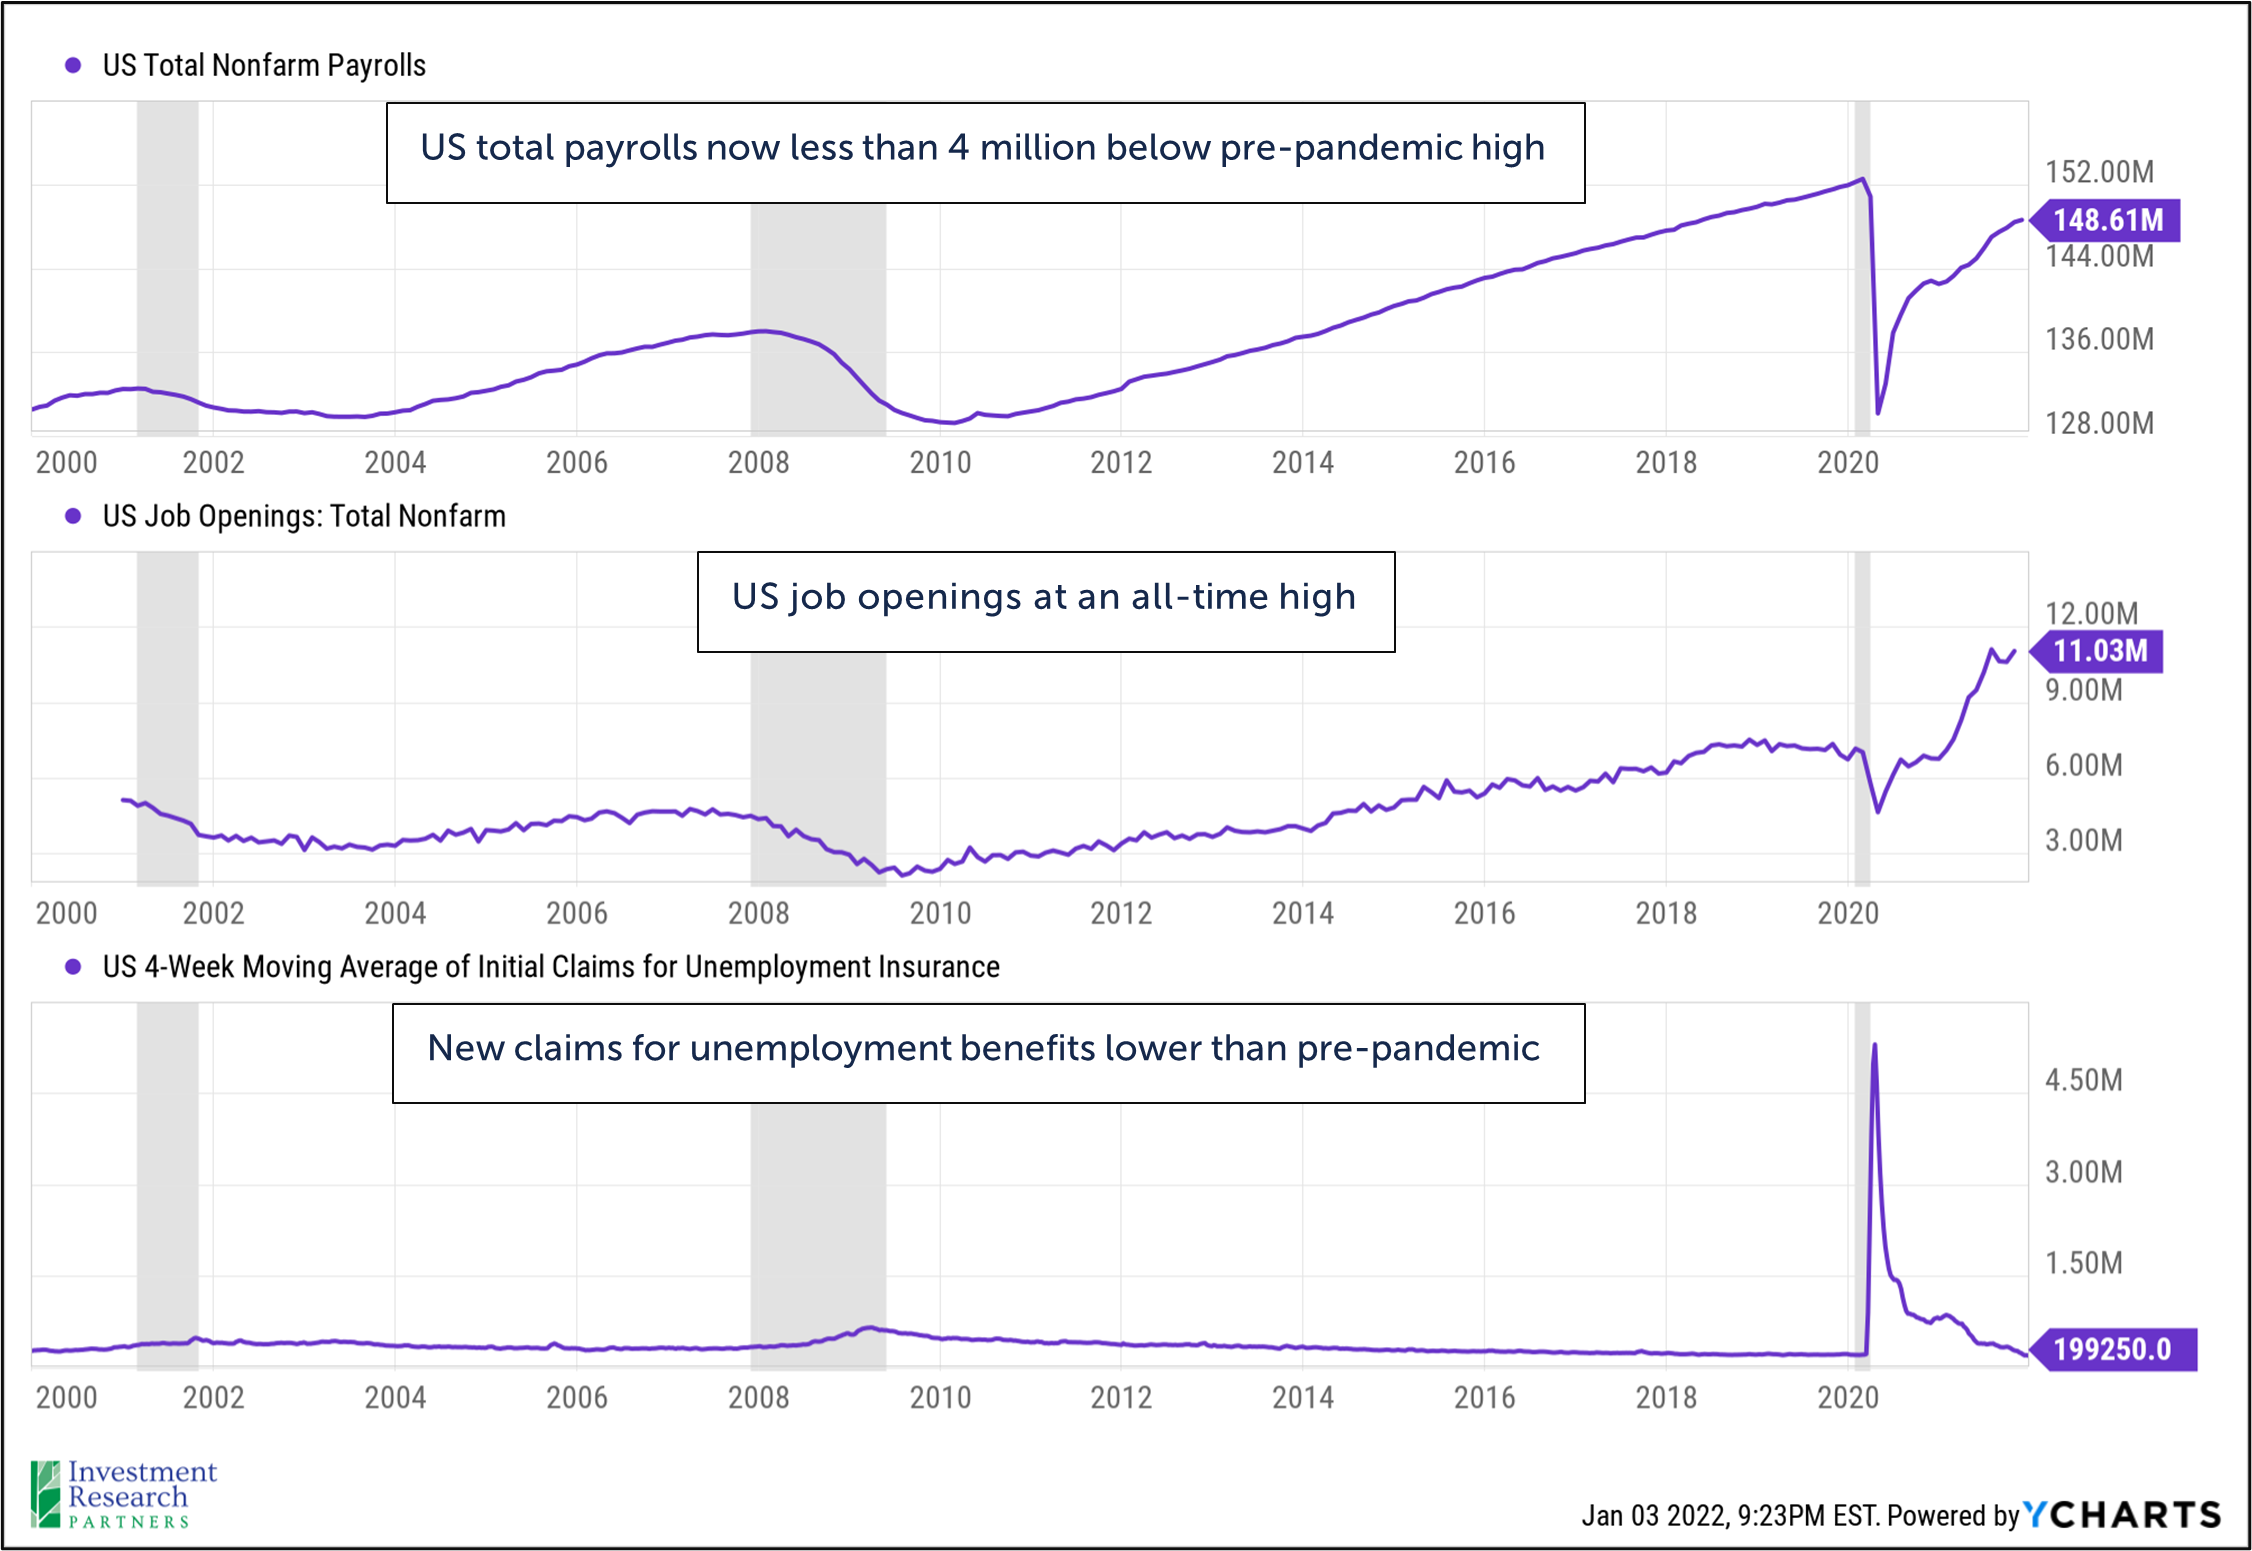 A line graph depicting US Total Nonfarm Payrolls from 2000 to 2021 with text reading: US total payrolls now less than 4 million below pre-pandemic high, a line graph depicting US Job Openings: Total Nonfarm form 2000 to 2021 with text reading: US job openings at an all-time high, and a line graph depicting US 4-Week Moving Average of Initial Claims for Unemployment Insurance from 2000 to 2021 with text reading: New claims for unemployment benefits lower than pre-pandemic